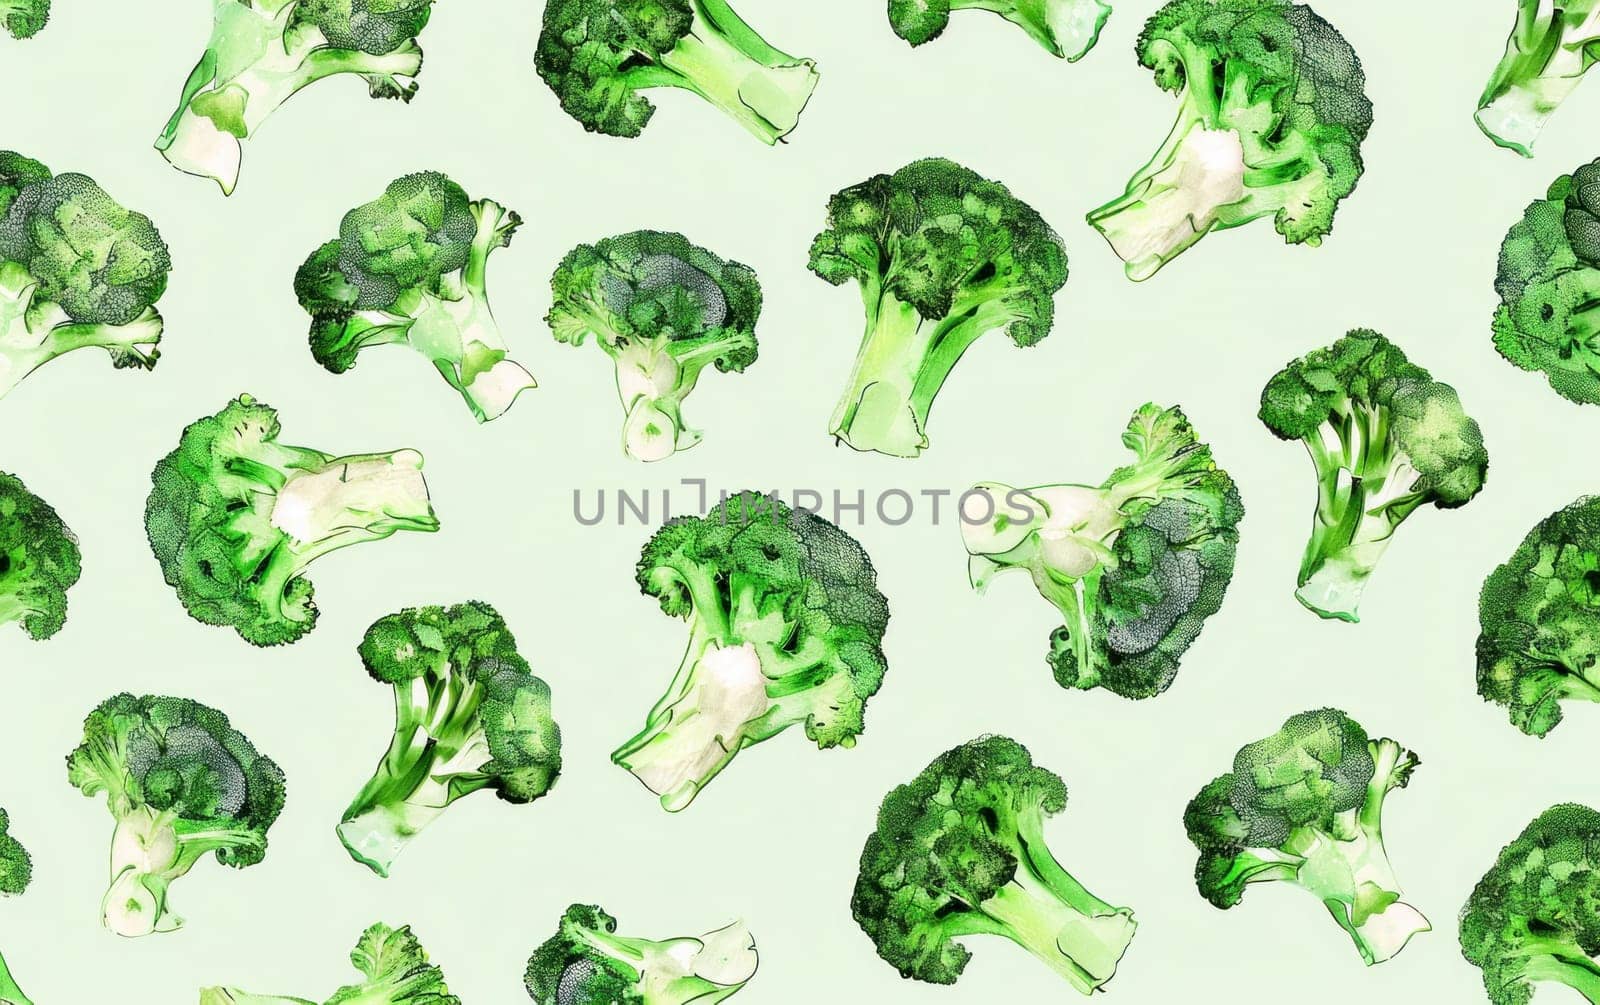 Pattern of fresh broccoli on light green background with text broccoli and green healthy food and nutrition concept